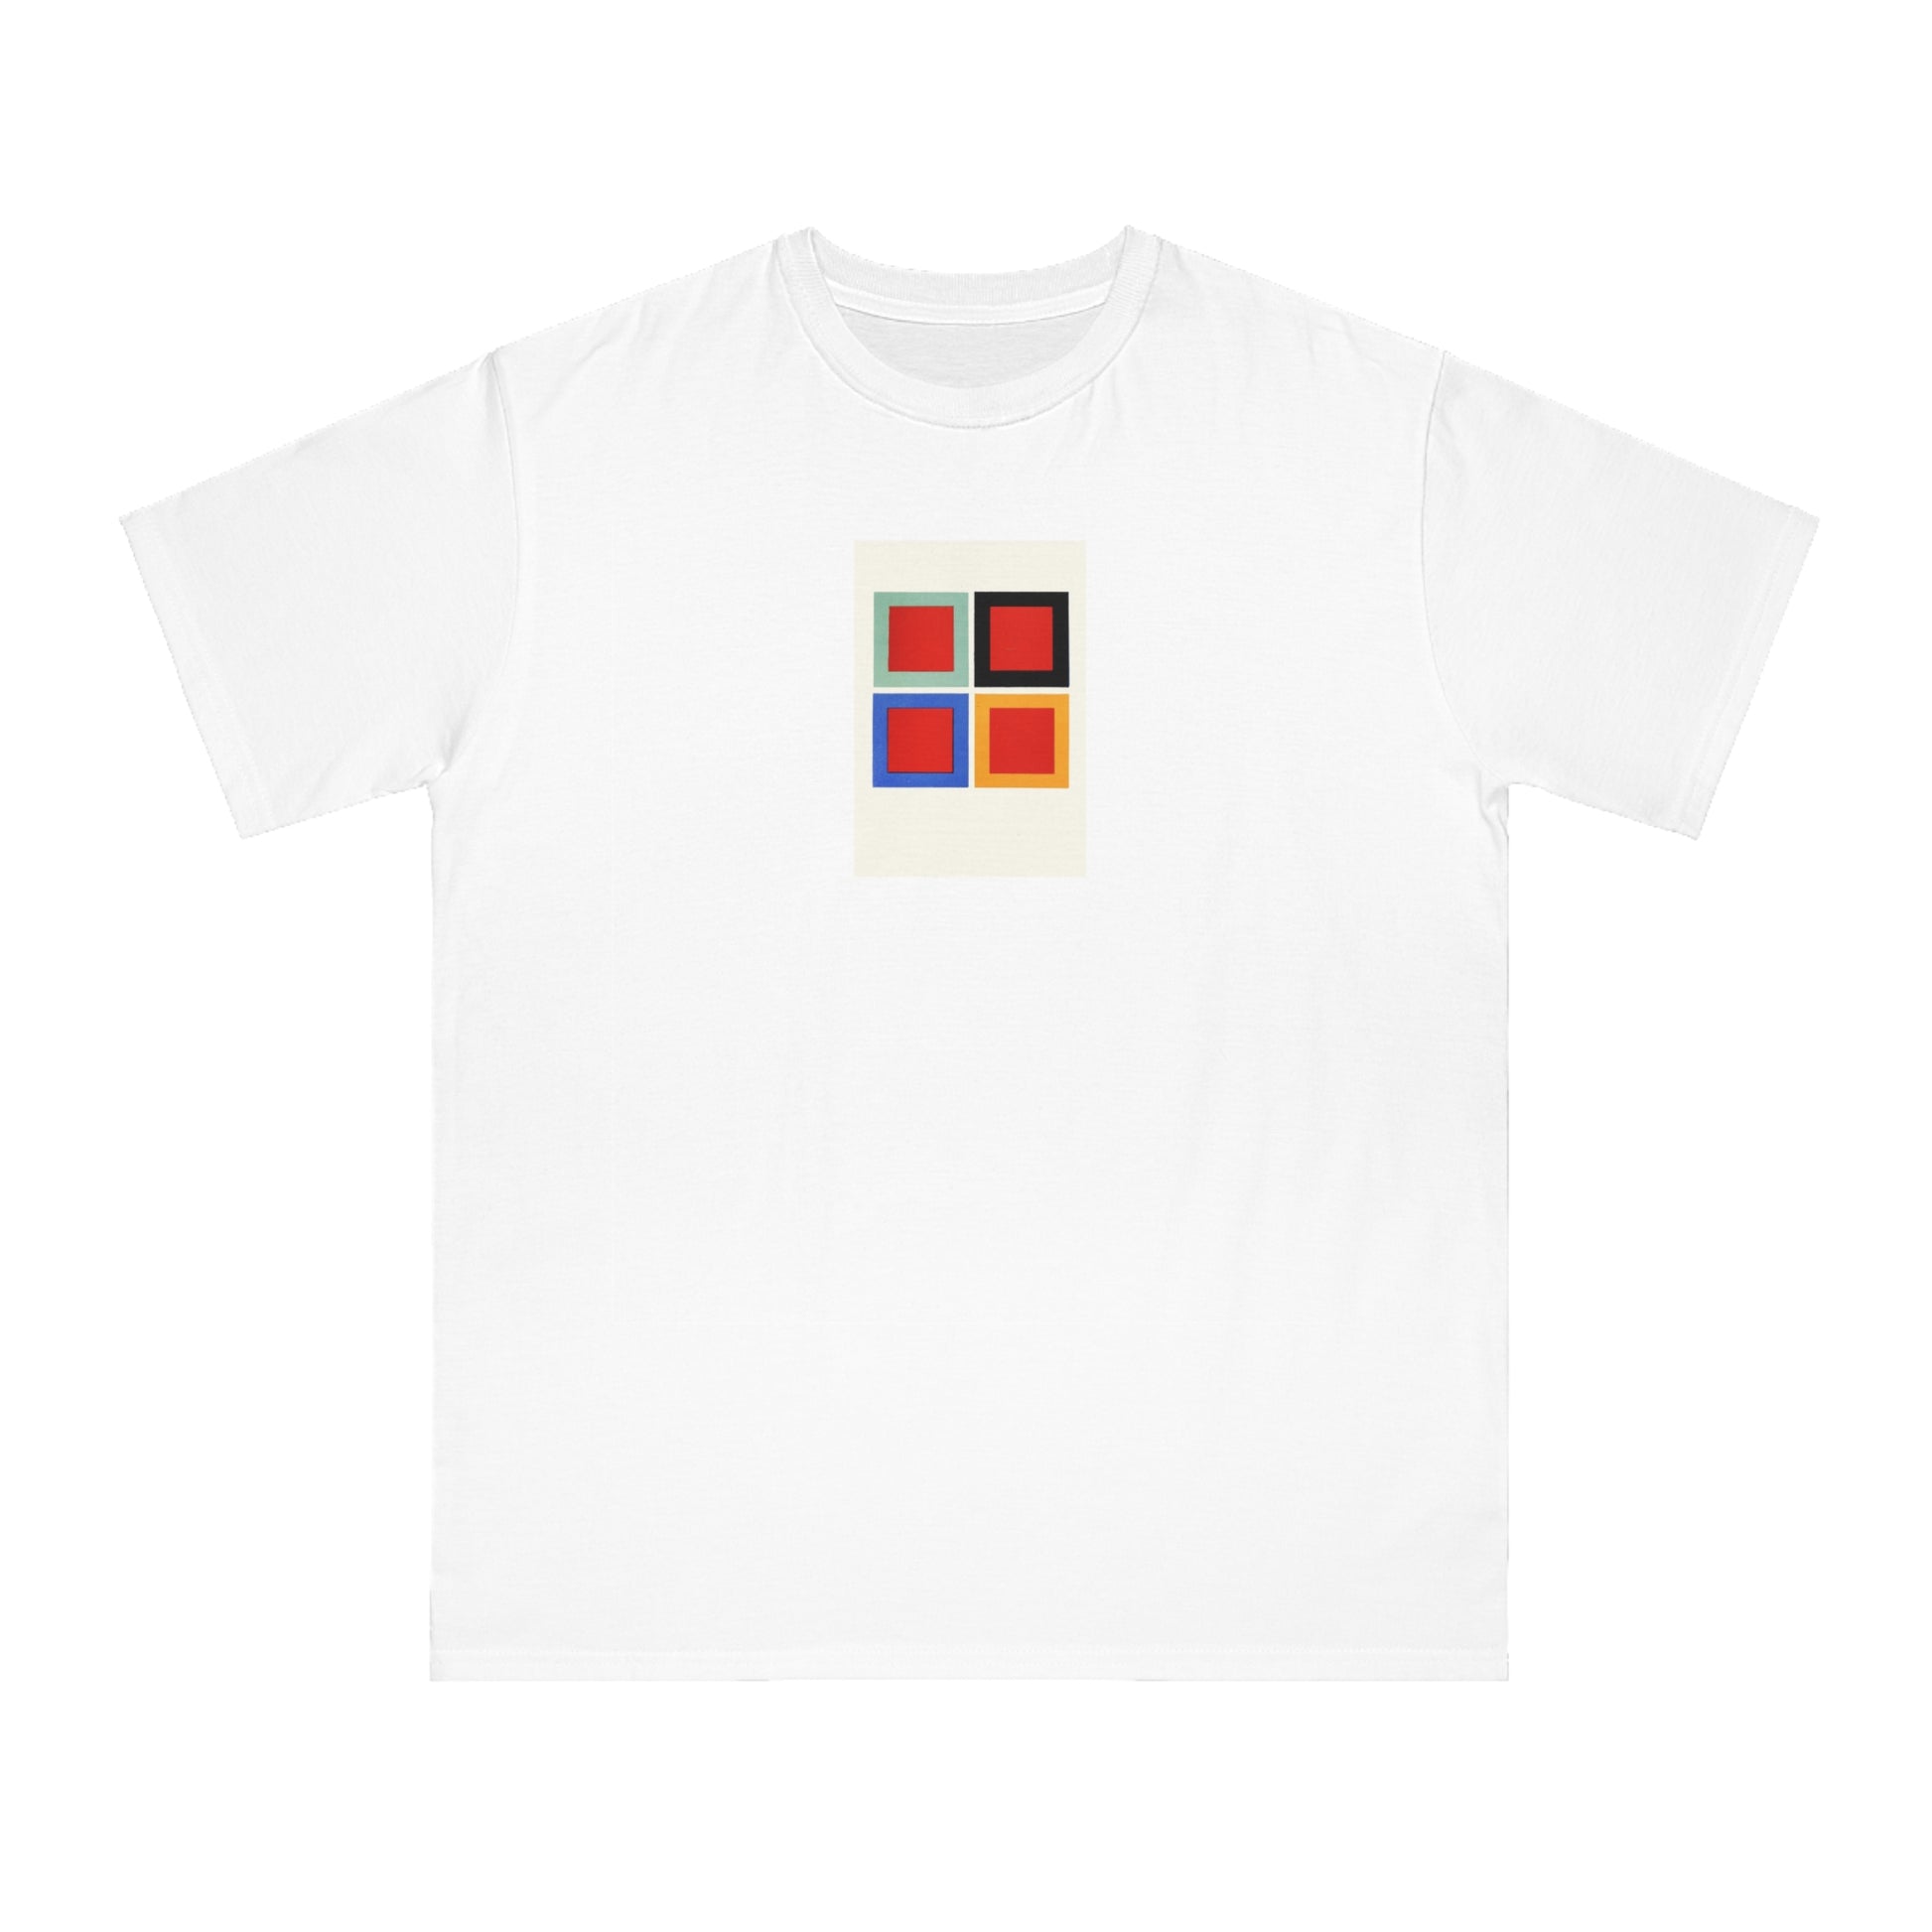 a white t - shirt with a red, yellow, and blue square design